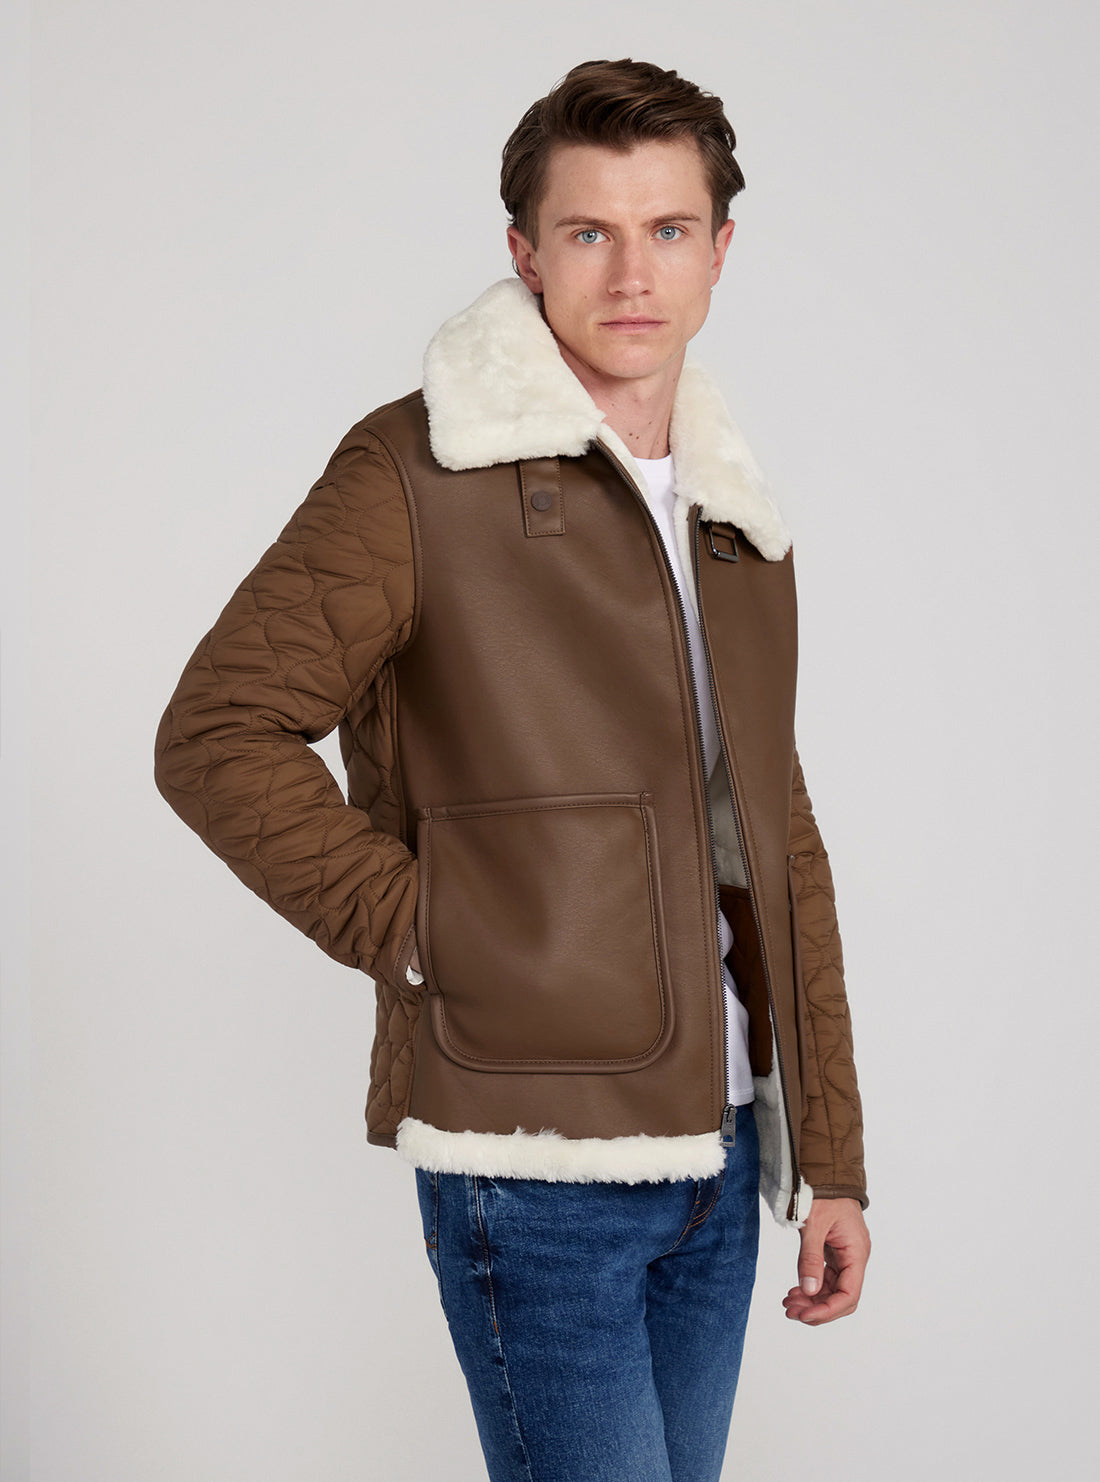 GUESS Brown Shearling Look Jacket side view